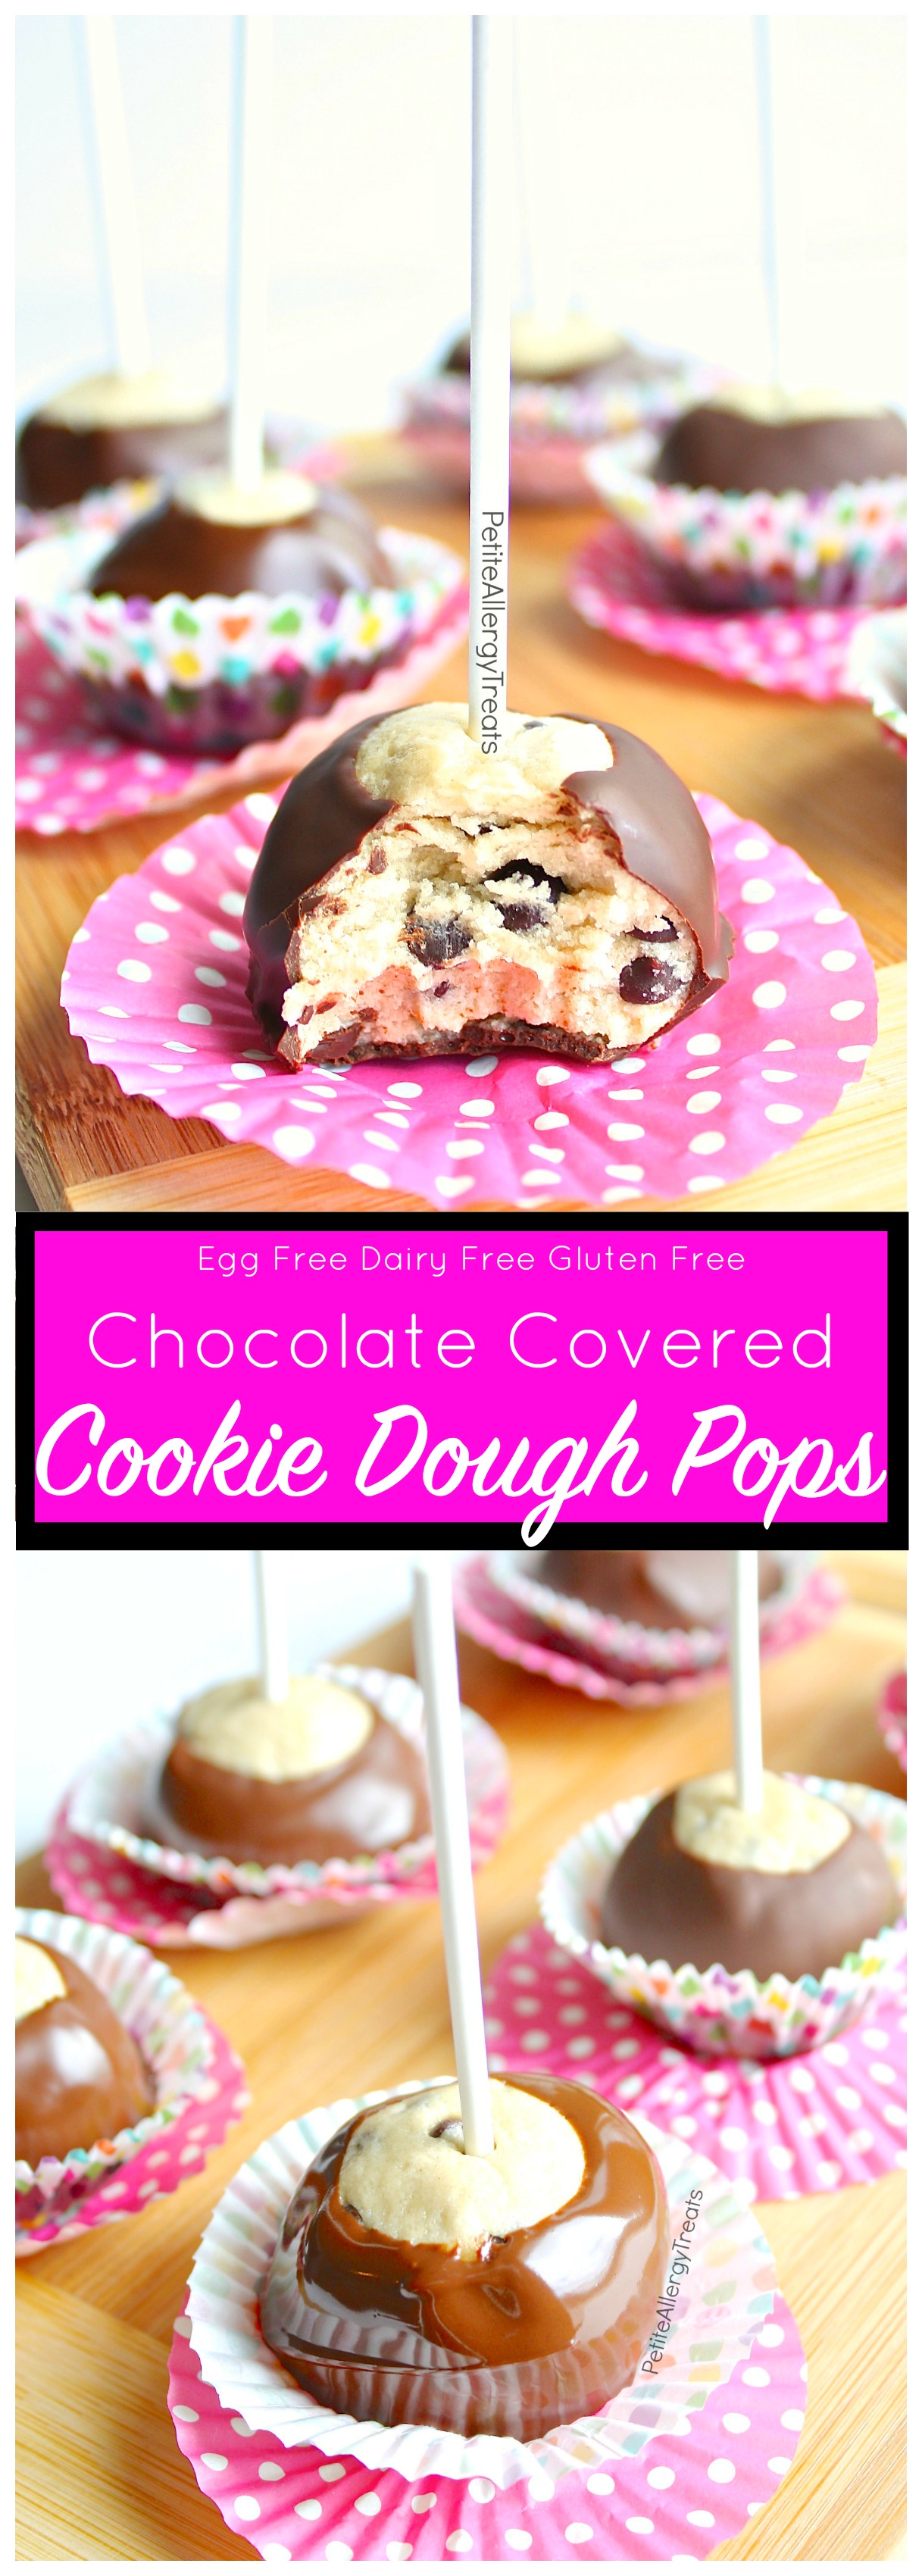 Gluten Free Vegan Cookie Dough Pops Recipe no bake ( dairy free) These chocolate covered cookie dough bombs are an easy no bake dessert. Food allergy friendly recipe